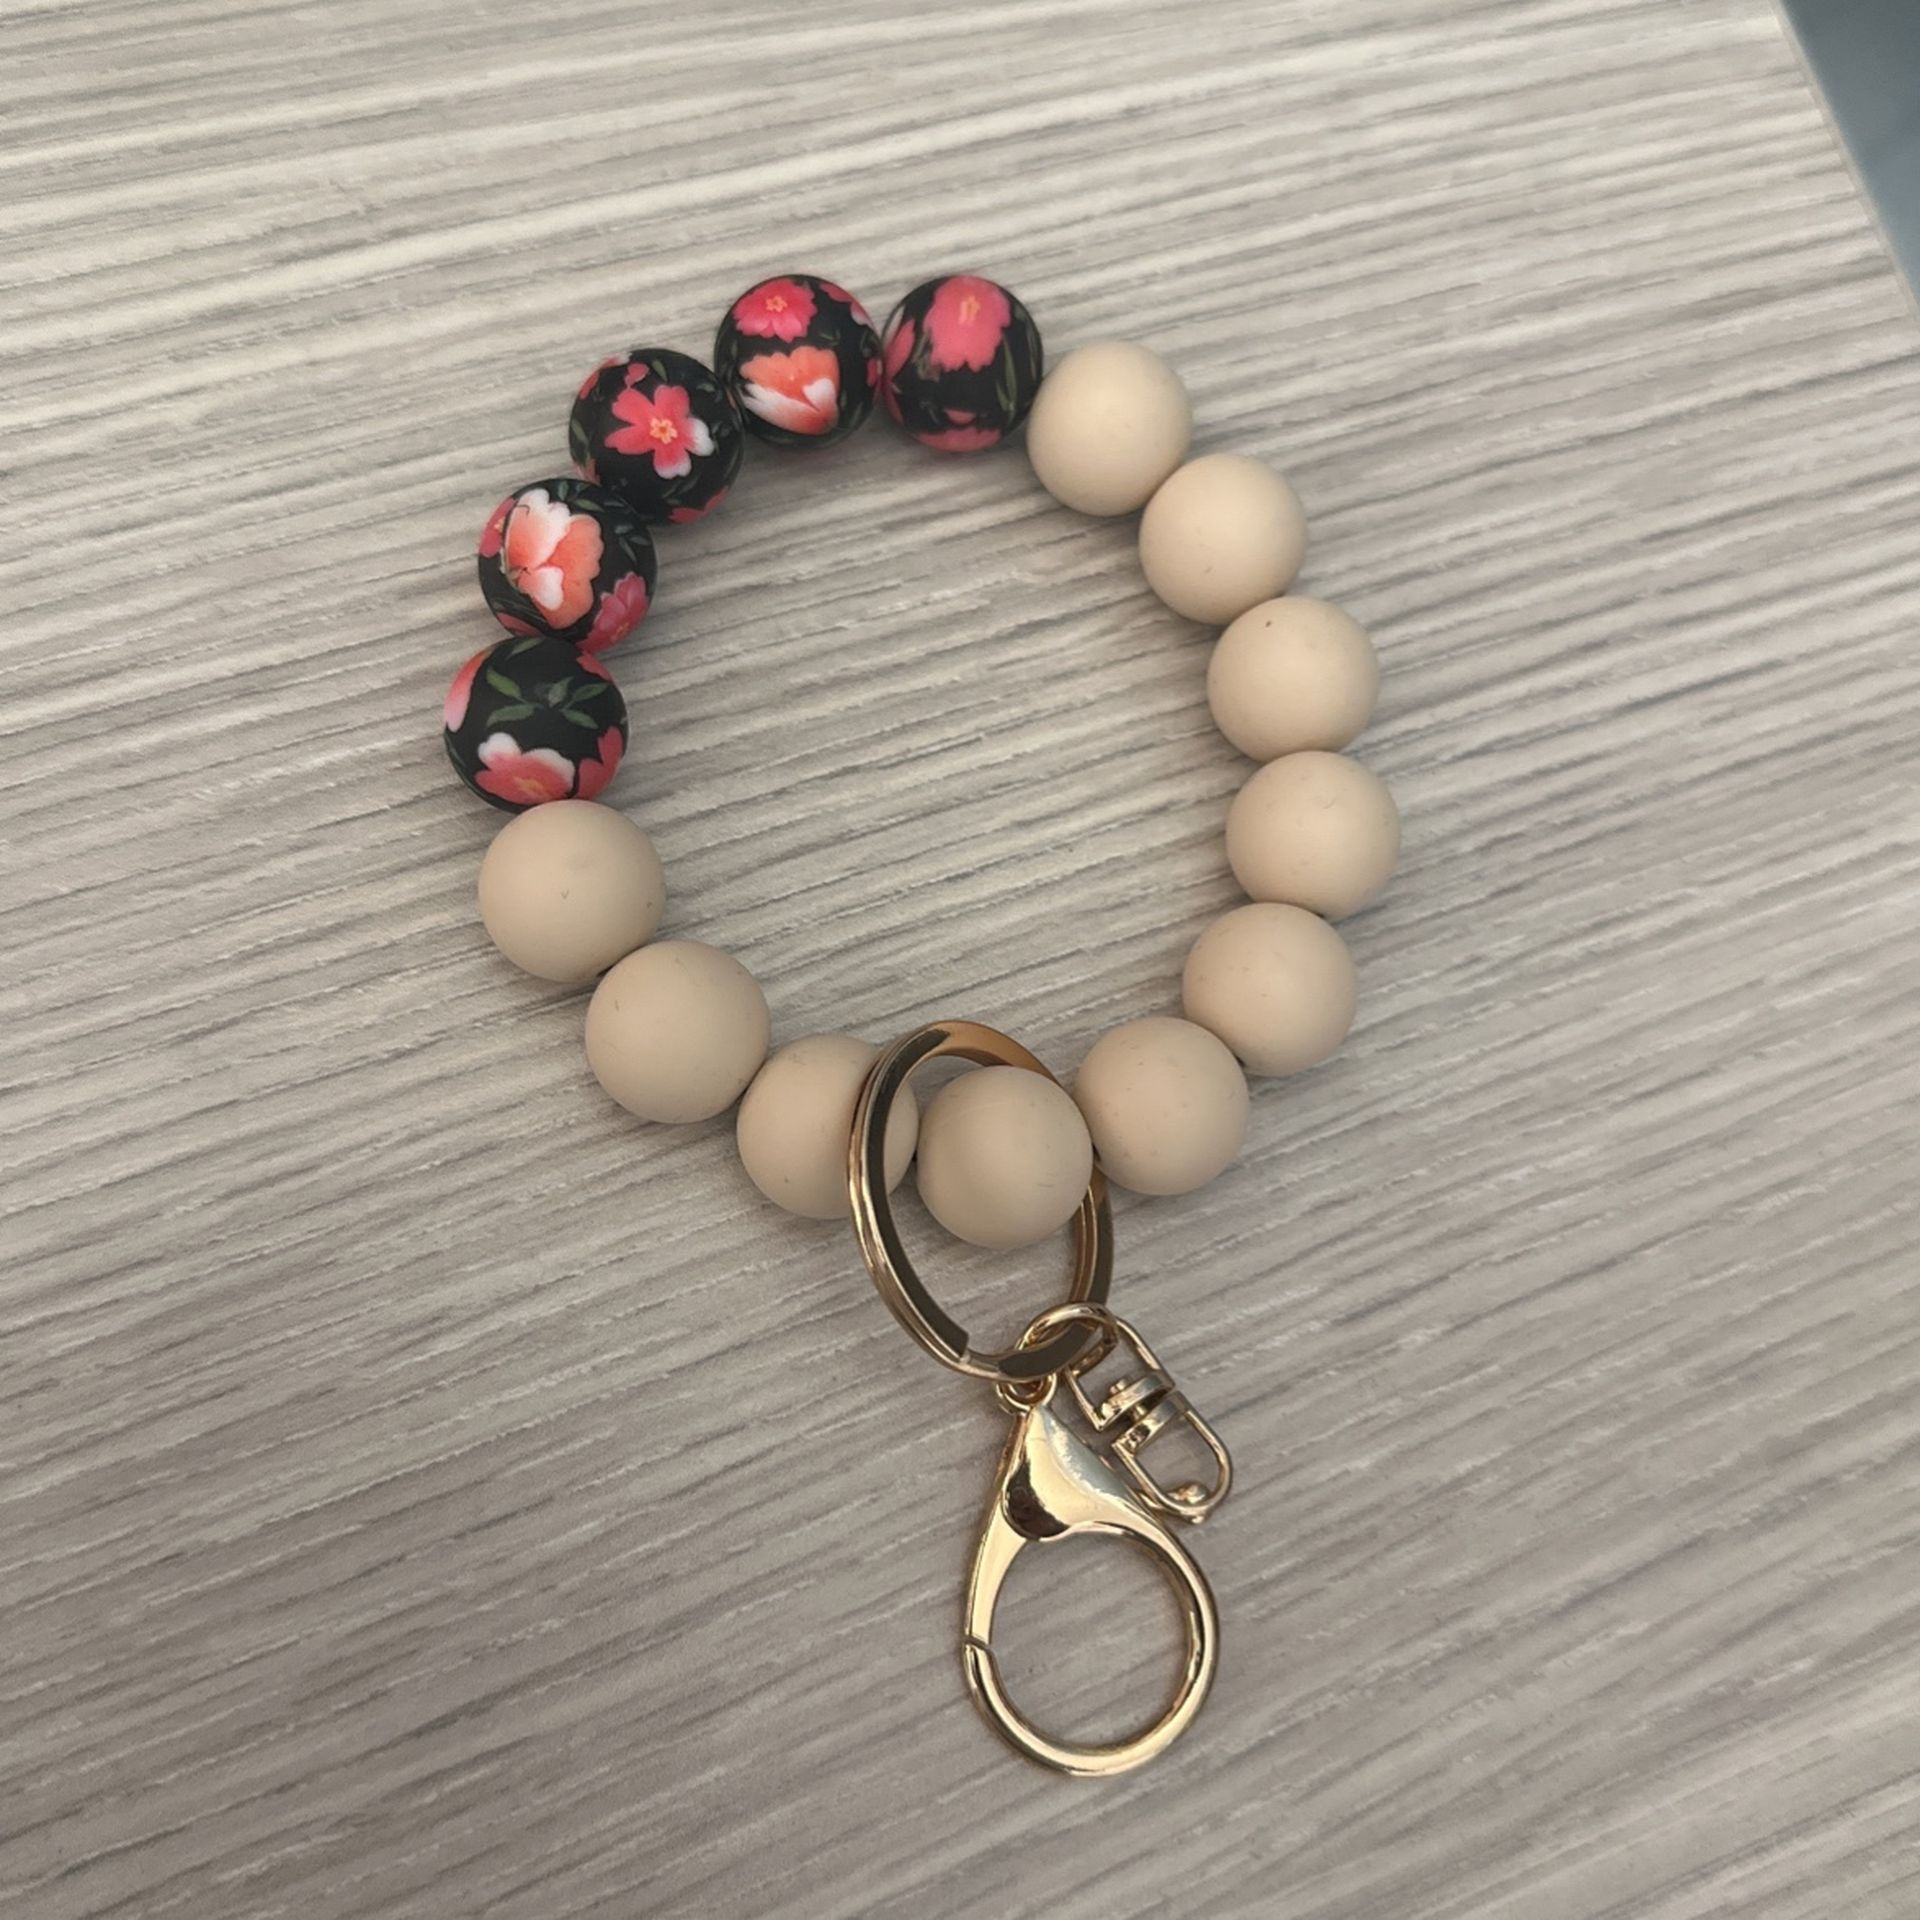 Silicone Bracelet Keychain for Wallet